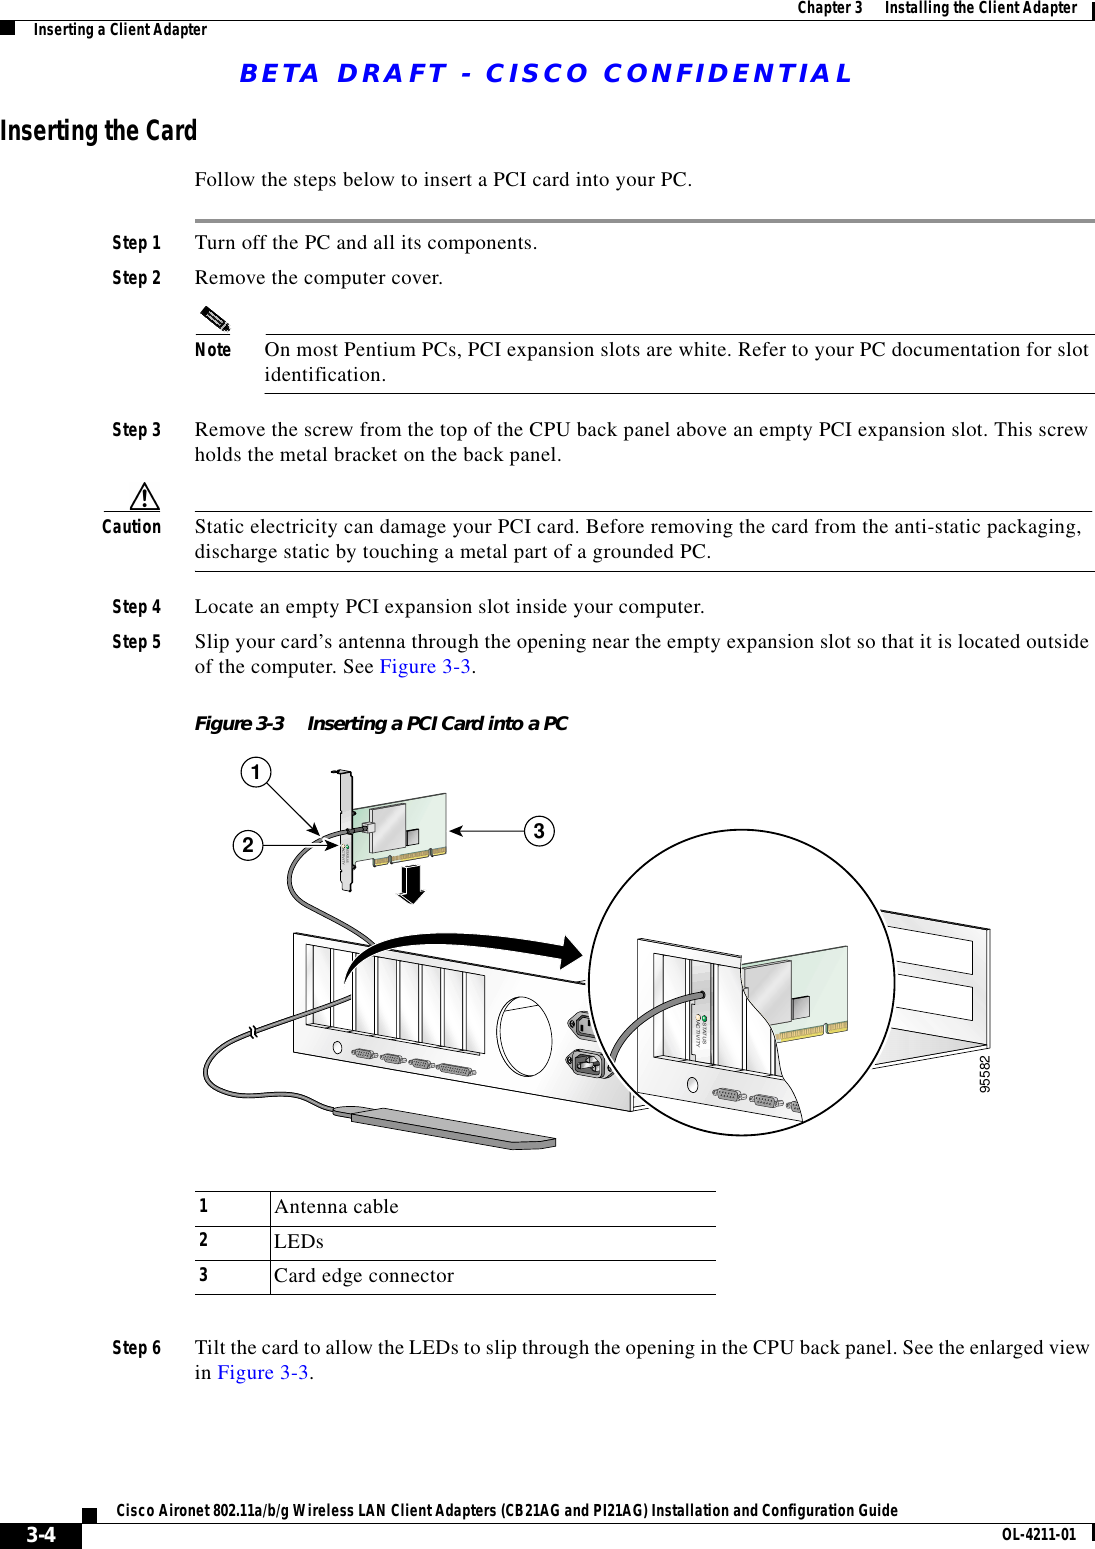 BETA DRAFT - CISCO CONFIDENTIAL3-4Cisco Aironet 802.11a/b/g Wireless LAN Client Adapters (CB21AG and PI21AG) Installation and Configuration Guide OL-4211-01Chapter 3      Installing the Client AdapterInserting a Client AdapterInserting the CardFollow the steps below to insert a PCI card into your PC.Step 1 Turn off the PC and all its components.Step 2 Remove the computer cover.Note On most Pentium PCs, PCI expansion slots are white. Refer to your PC documentation for slot identification.Step 3 Remove the screw from the top of the CPU back panel above an empty PCI expansion slot. This screw holds the metal bracket on the back panel.Caution Static electricity can damage your PCI card. Before removing the card from the anti-static packaging, discharge static by touching a metal part of a grounded PC.Step 4 Locate an empty PCI expansion slot inside your computer.Step 5 Slip your card’s antenna through the opening near the empty expansion slot so that it is located outside of the computer. See Figure 3-3.Figure 3-3 Inserting a PCI Card into a PCStep 6 Tilt the card to allow the LEDs to slip through the opening in the CPU back panel. See the enlarged view in Figure 3-3.STATUSACTIVITY95582STATUSACTIVITY2131Antenna cable2LEDs3Card edge connector